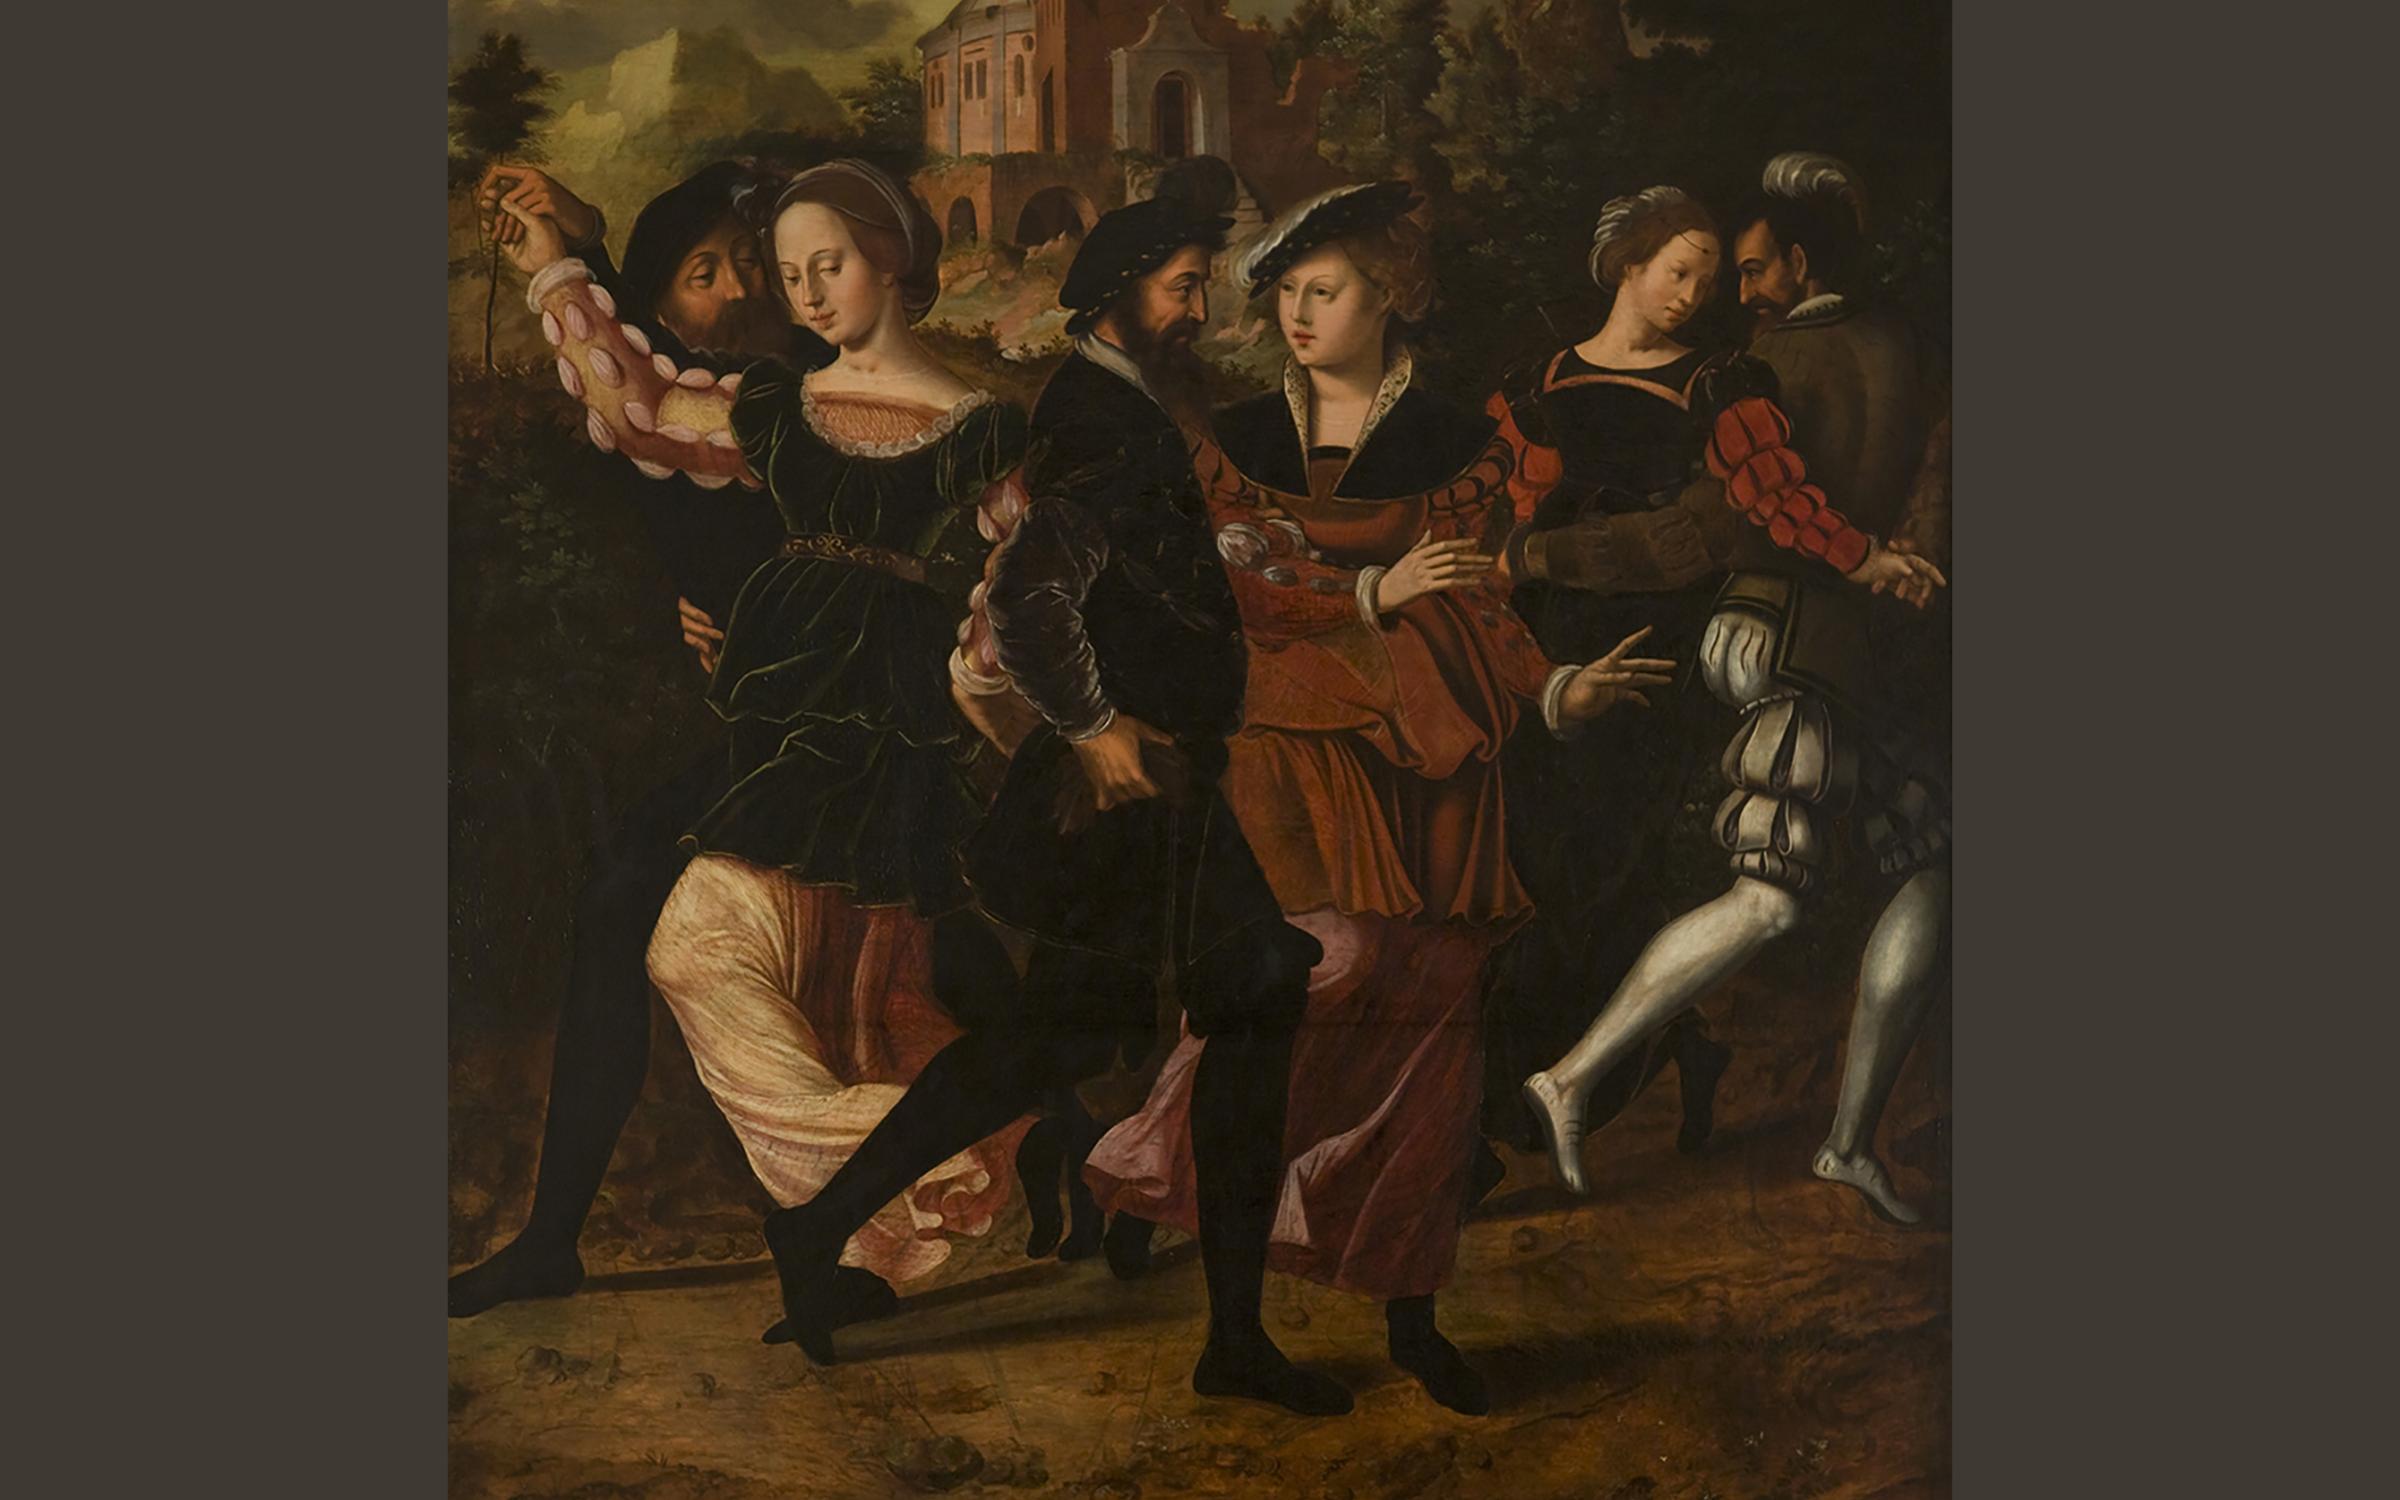 Ambrosius Benson, (ca. 1495-1550), Flemish, Elegant Couples Dancing in a Landscape, ca. 1545, oil on panel, purchased with funds from Mrs. Howard J. Stoddard in honor of John Preston Creer and Mary Elizabeth Brockbank Creer, UMFA1976.016